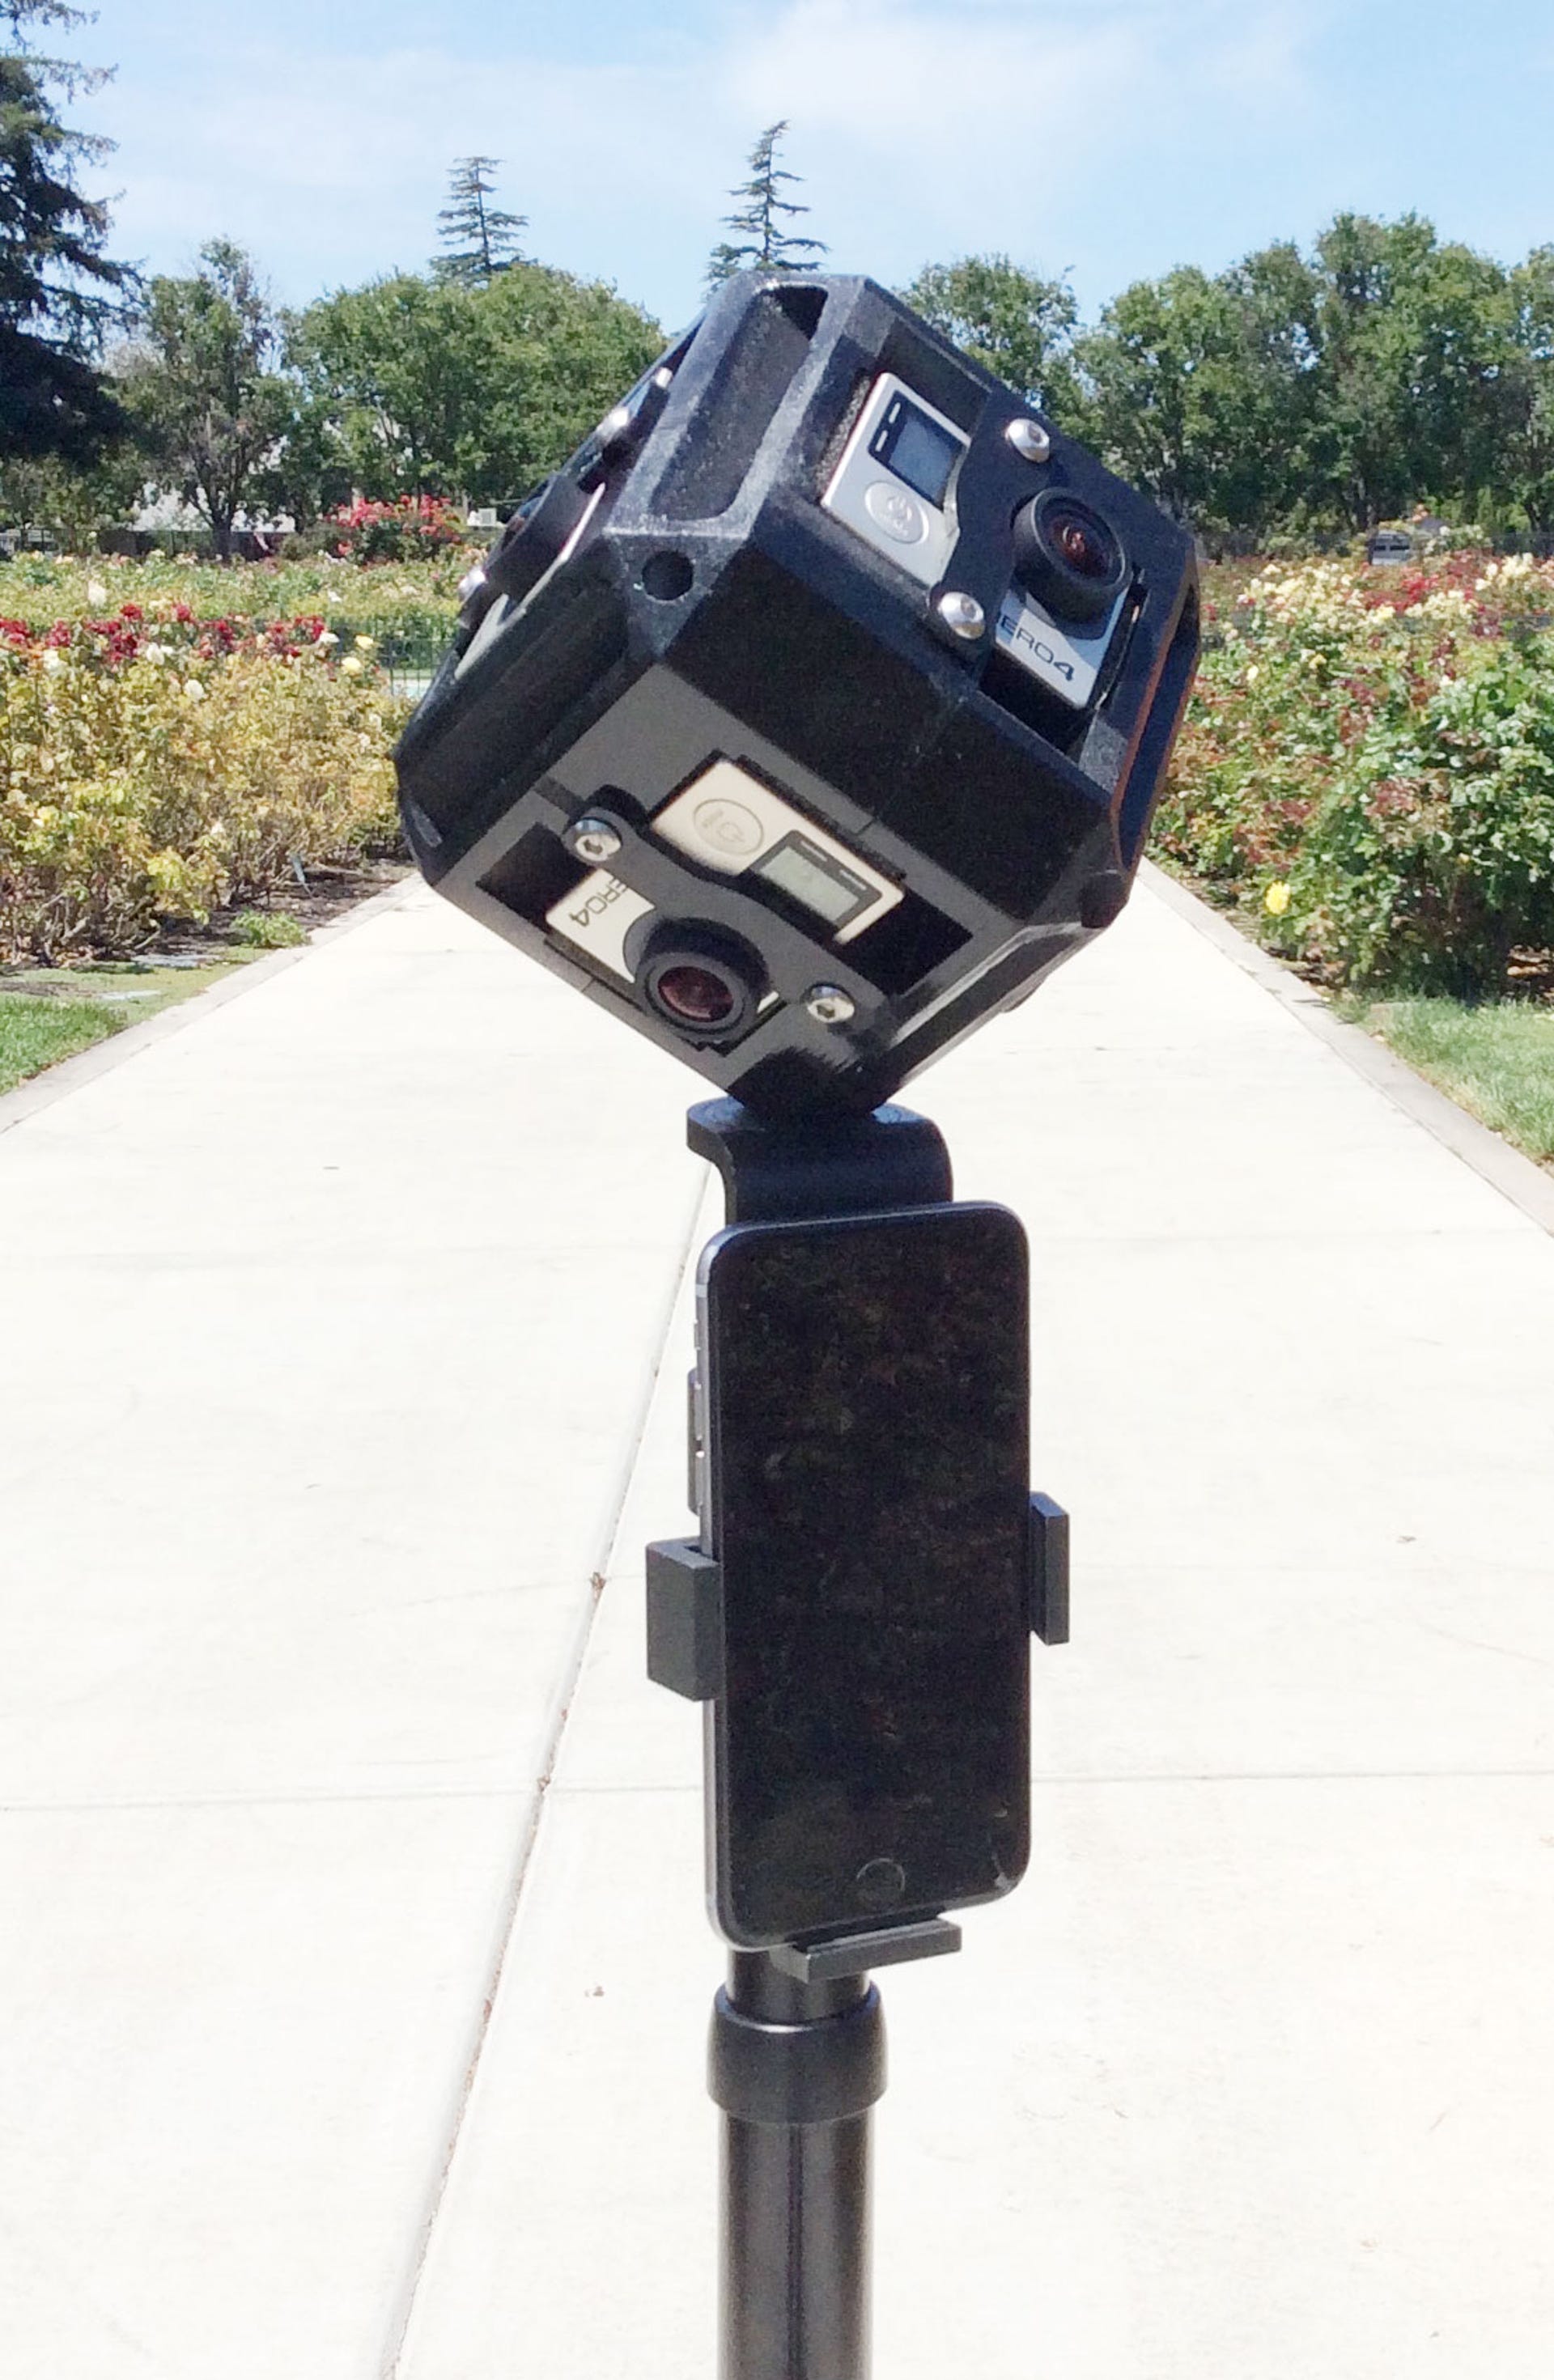 The 360 Camera Dolly can hold a VR camera setup like this one using GoPro cameras and is piloted using an attached iPhone.